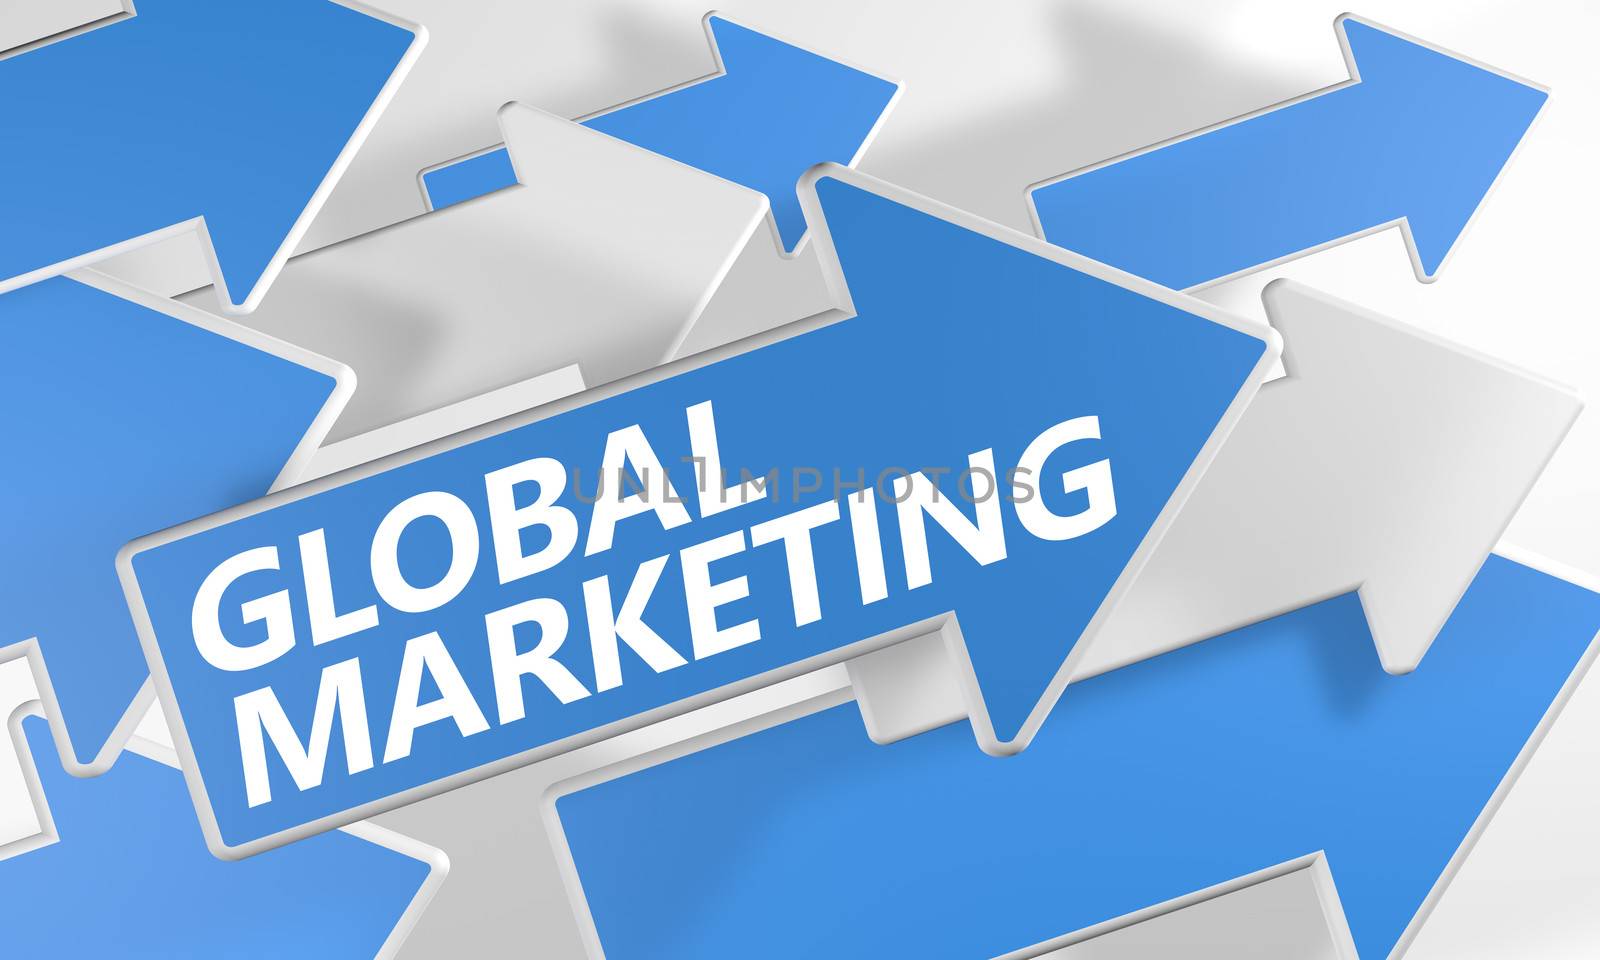 Global Marketing 3d render concept with blue and white arrows flying over a white background.